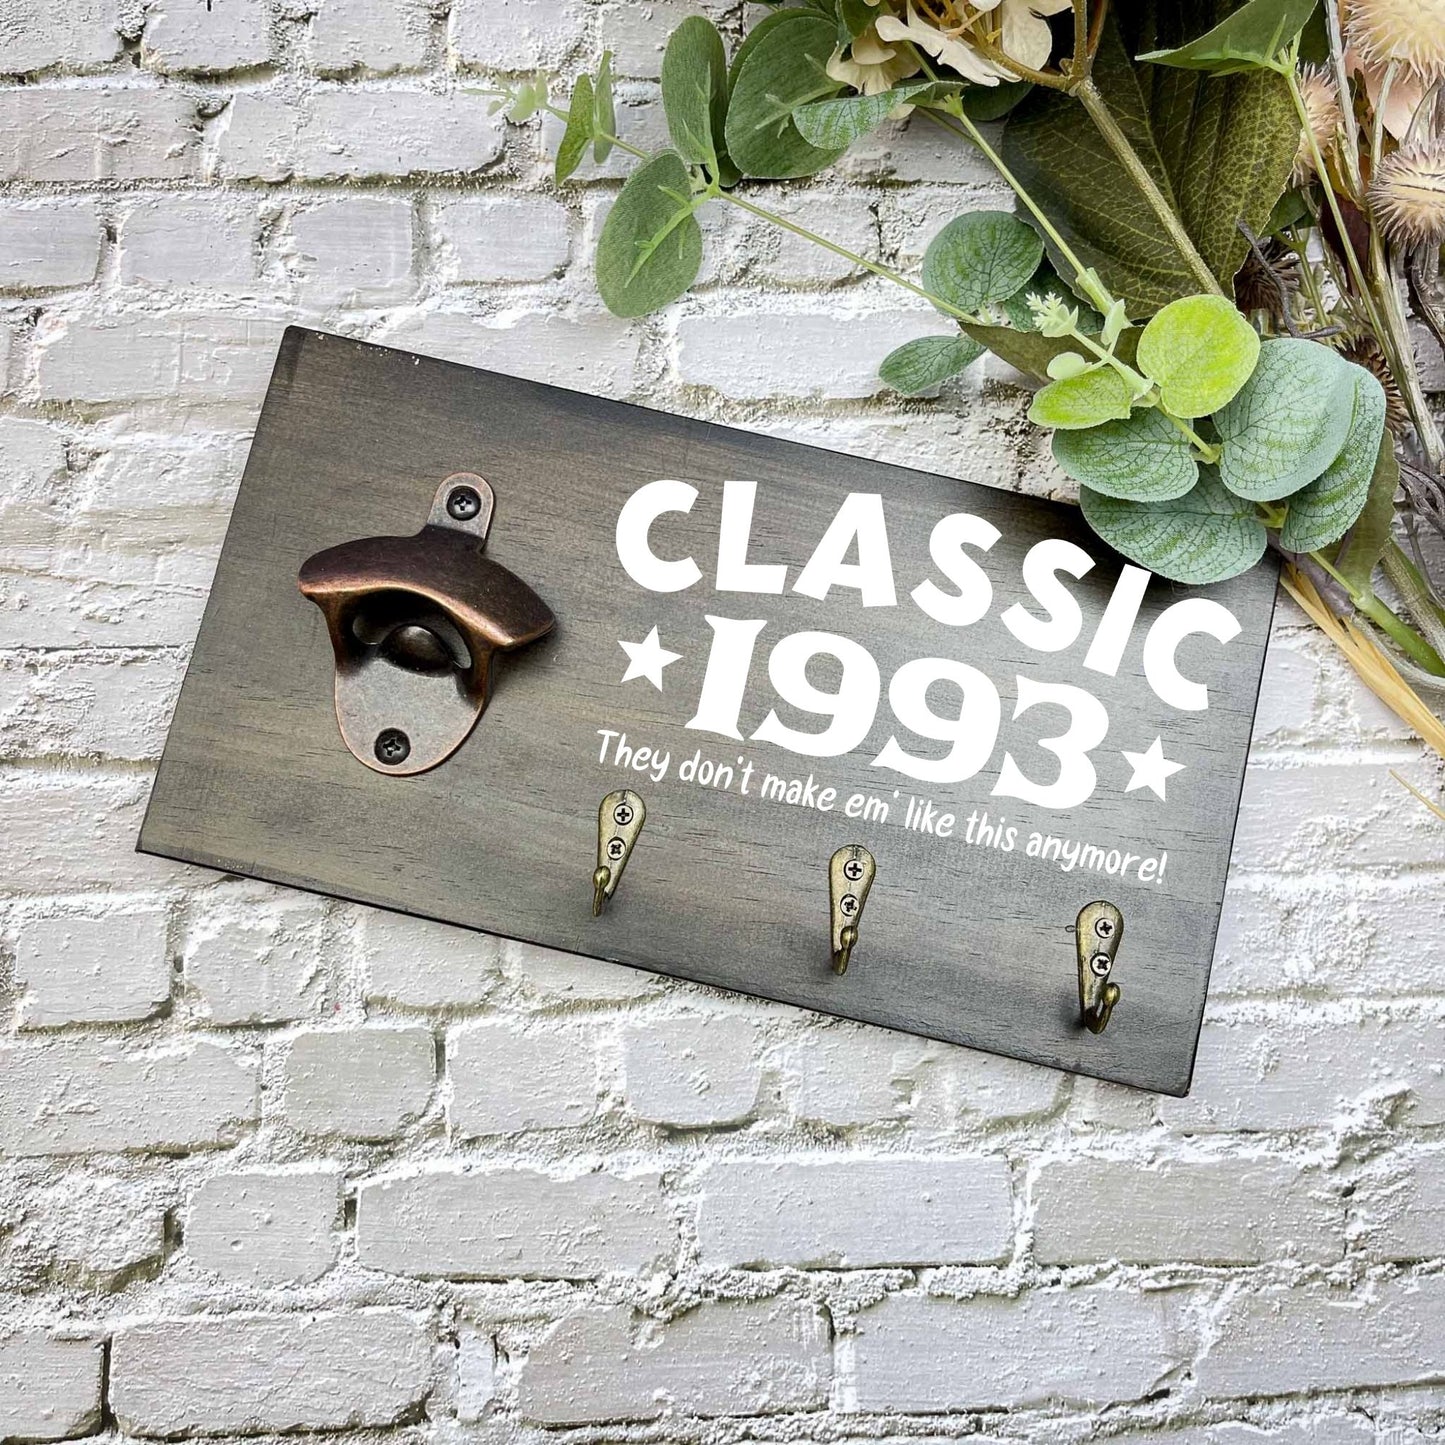 Classic 30th Birthday beer sign, 1993 beer sign gift, 1994 birthday, 30th celebration, bottle opener sign